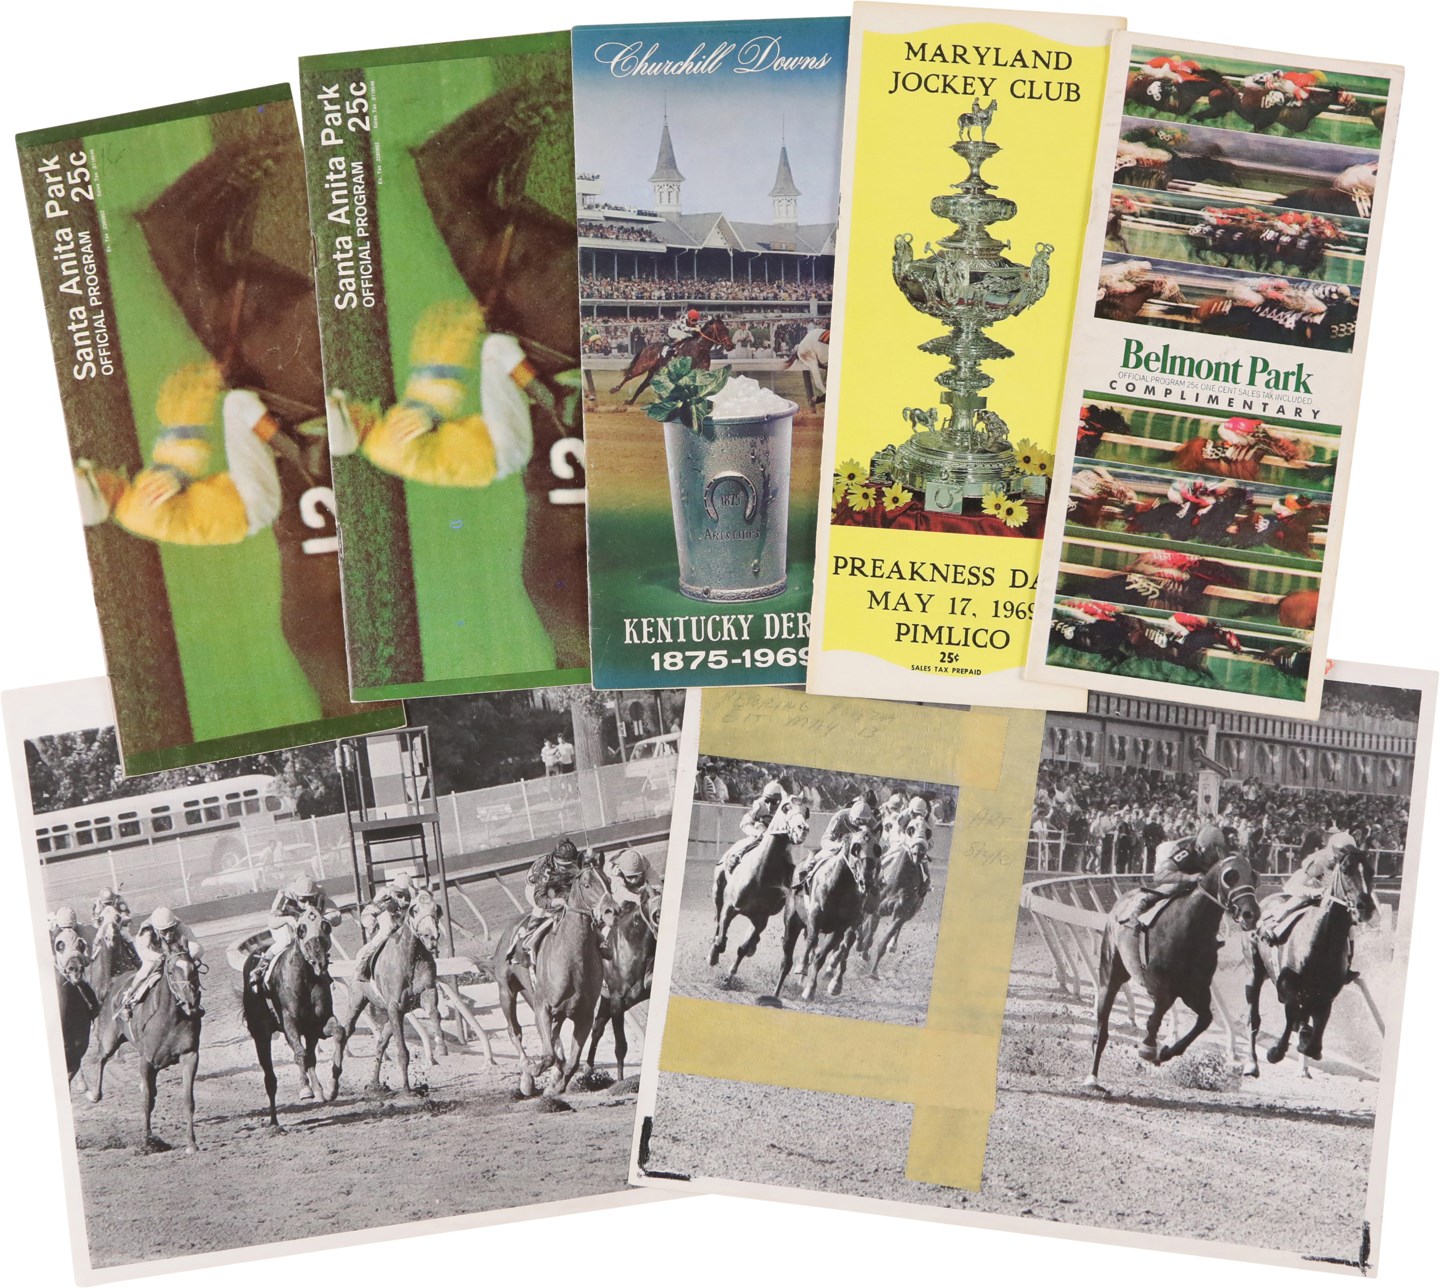 Horse Racing - Hall of Fame Racehorse Majestic Prince Programs and Photos (32)